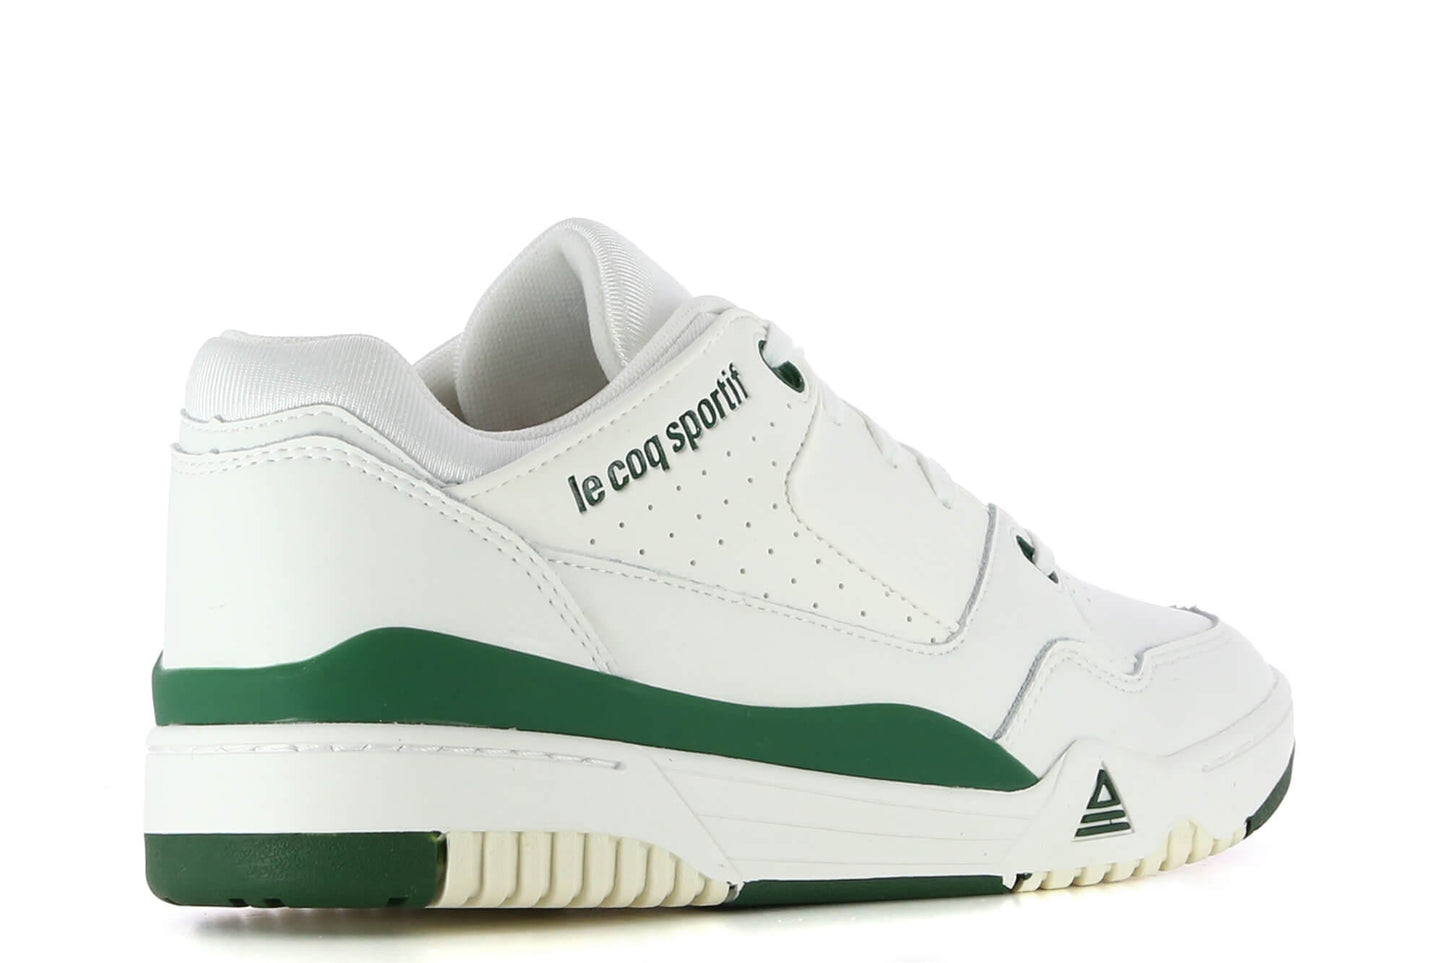 LE COQ SPORTIF LCS T1000 - Optical White Greener Pastures